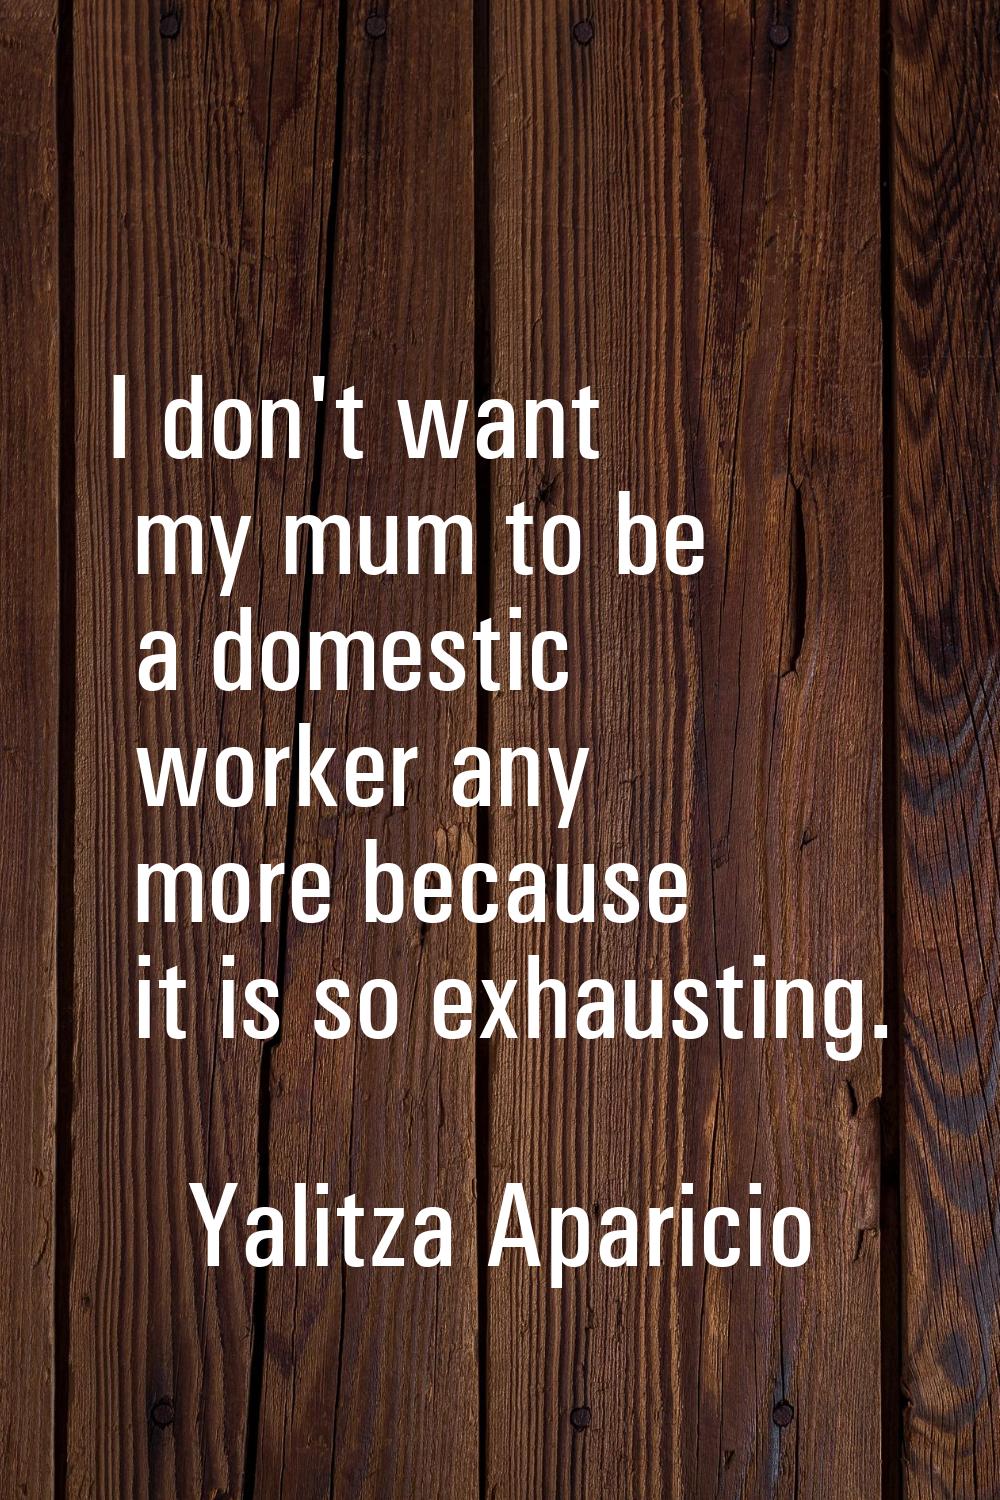 I don't want my mum to be a domestic worker any more because it is so exhausting.